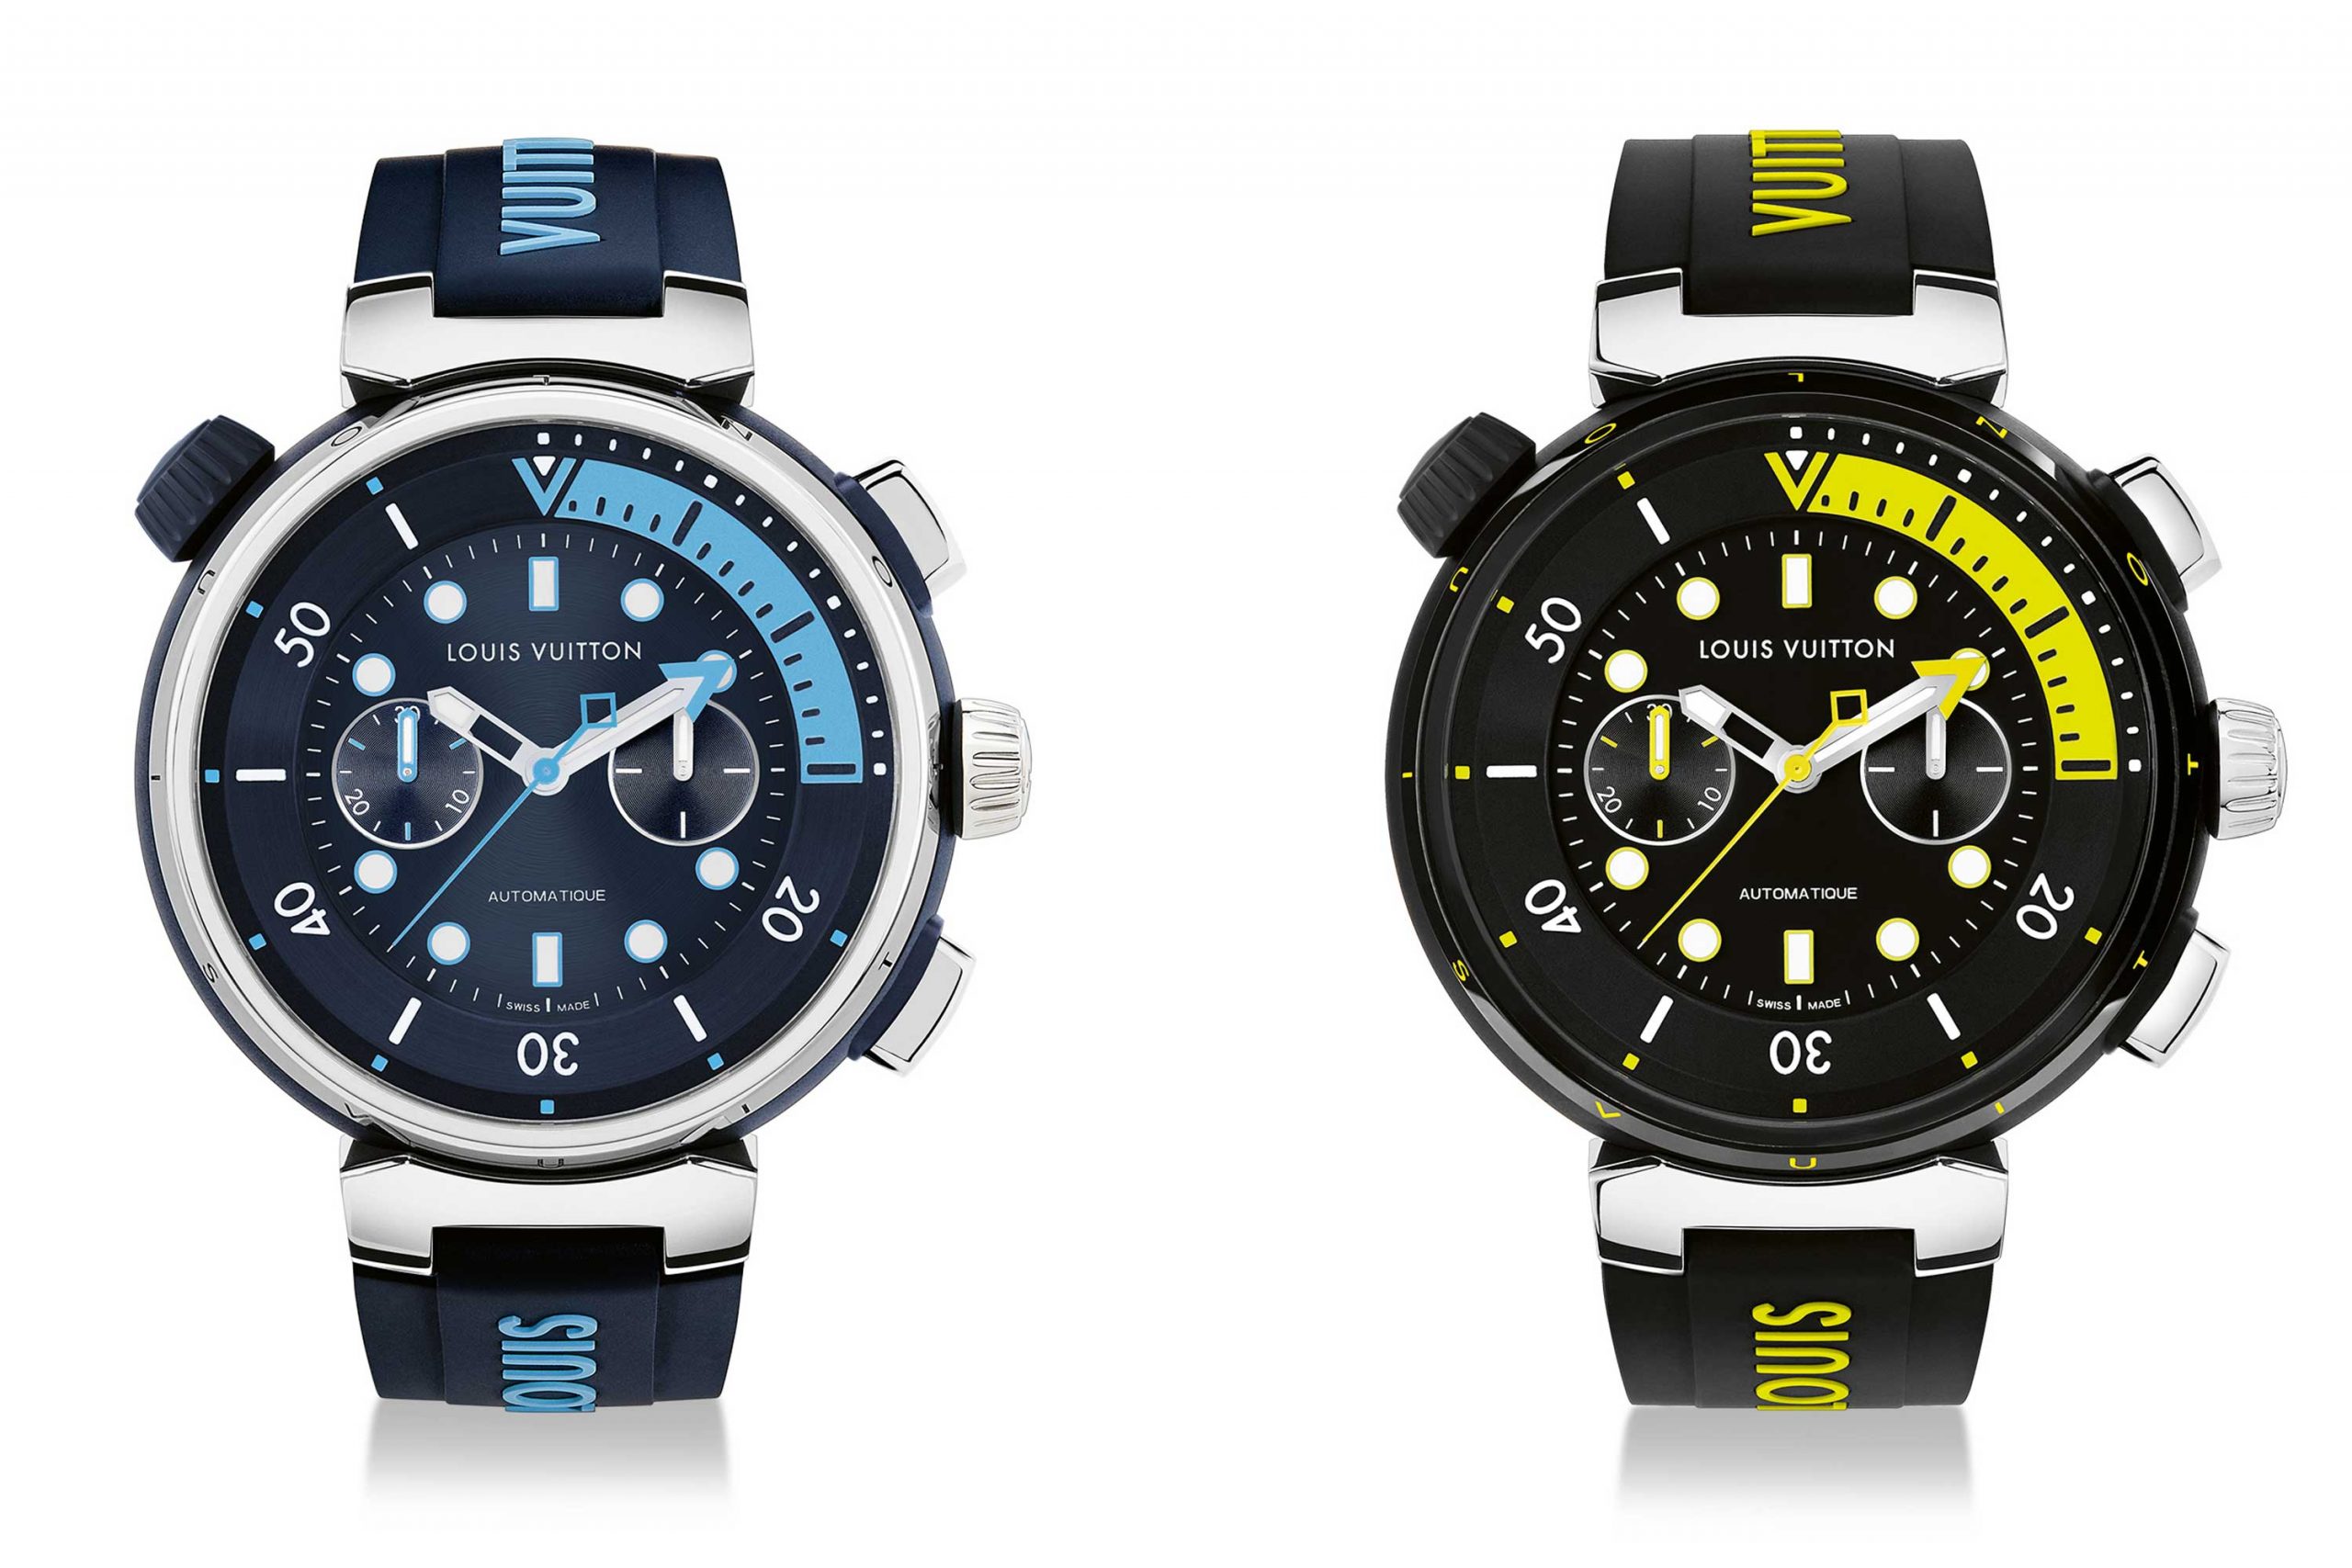 Louis Vuitton Tambour Street Diver Chronograph in Skyline Blue and Neon Black with 100 meters of water resistance and internal rotating bezel to keep track of elapsed time